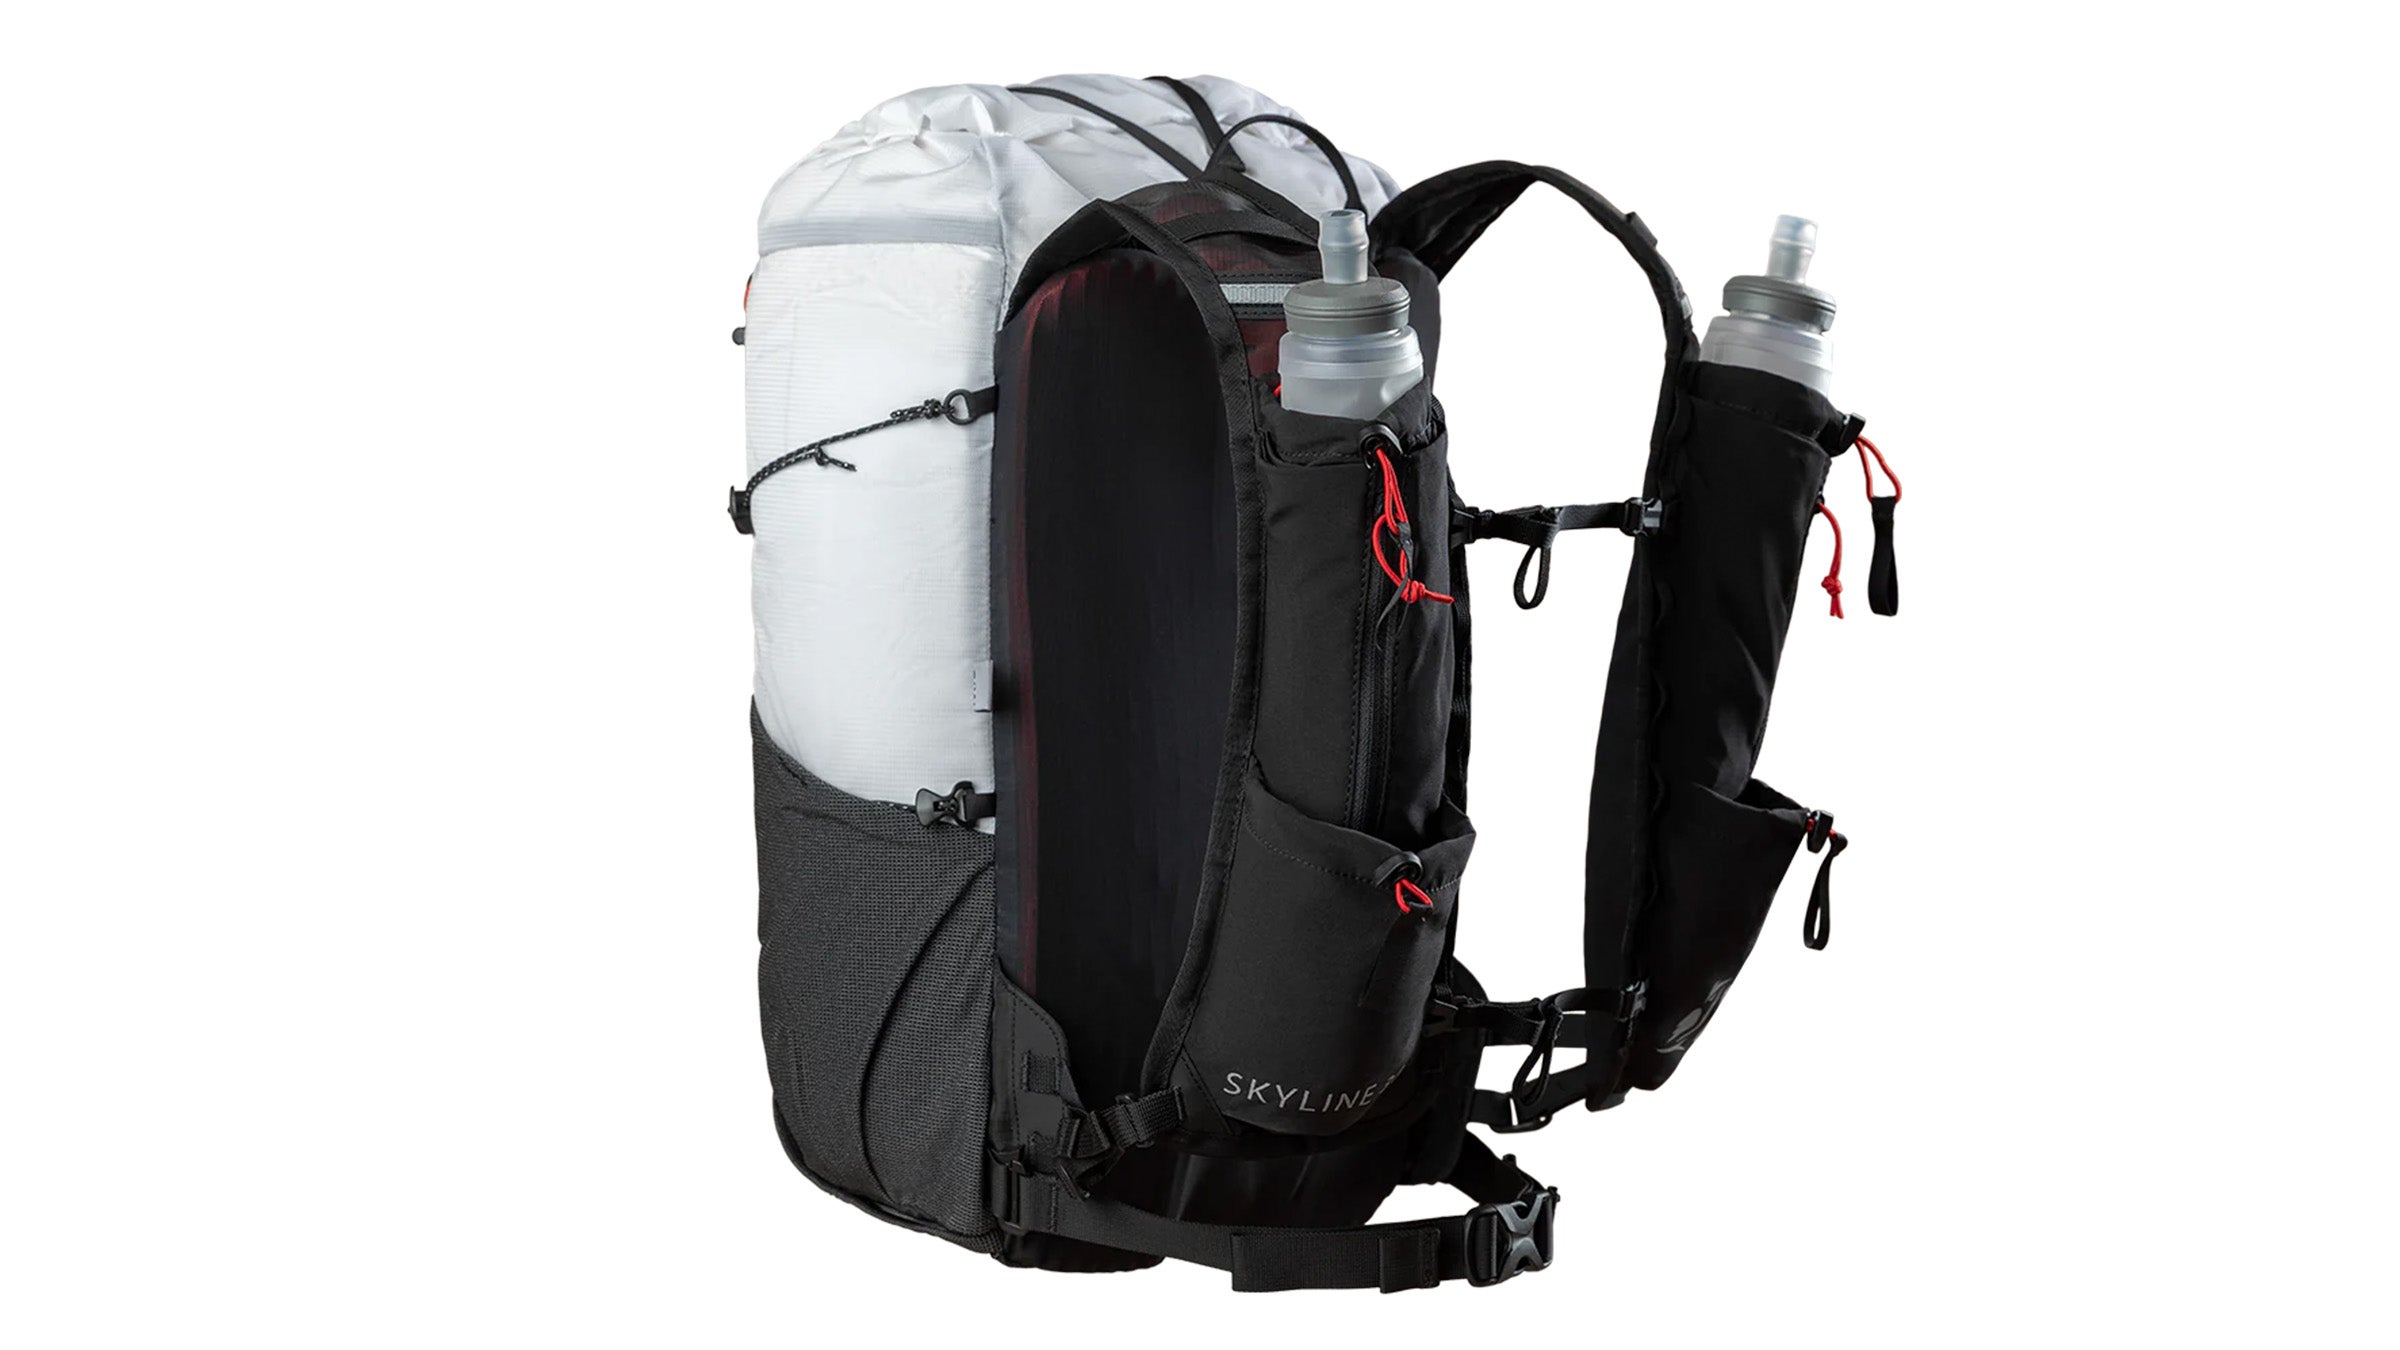 Backpack Reviews  Find the Best Packs for Backpacking - Backpacker